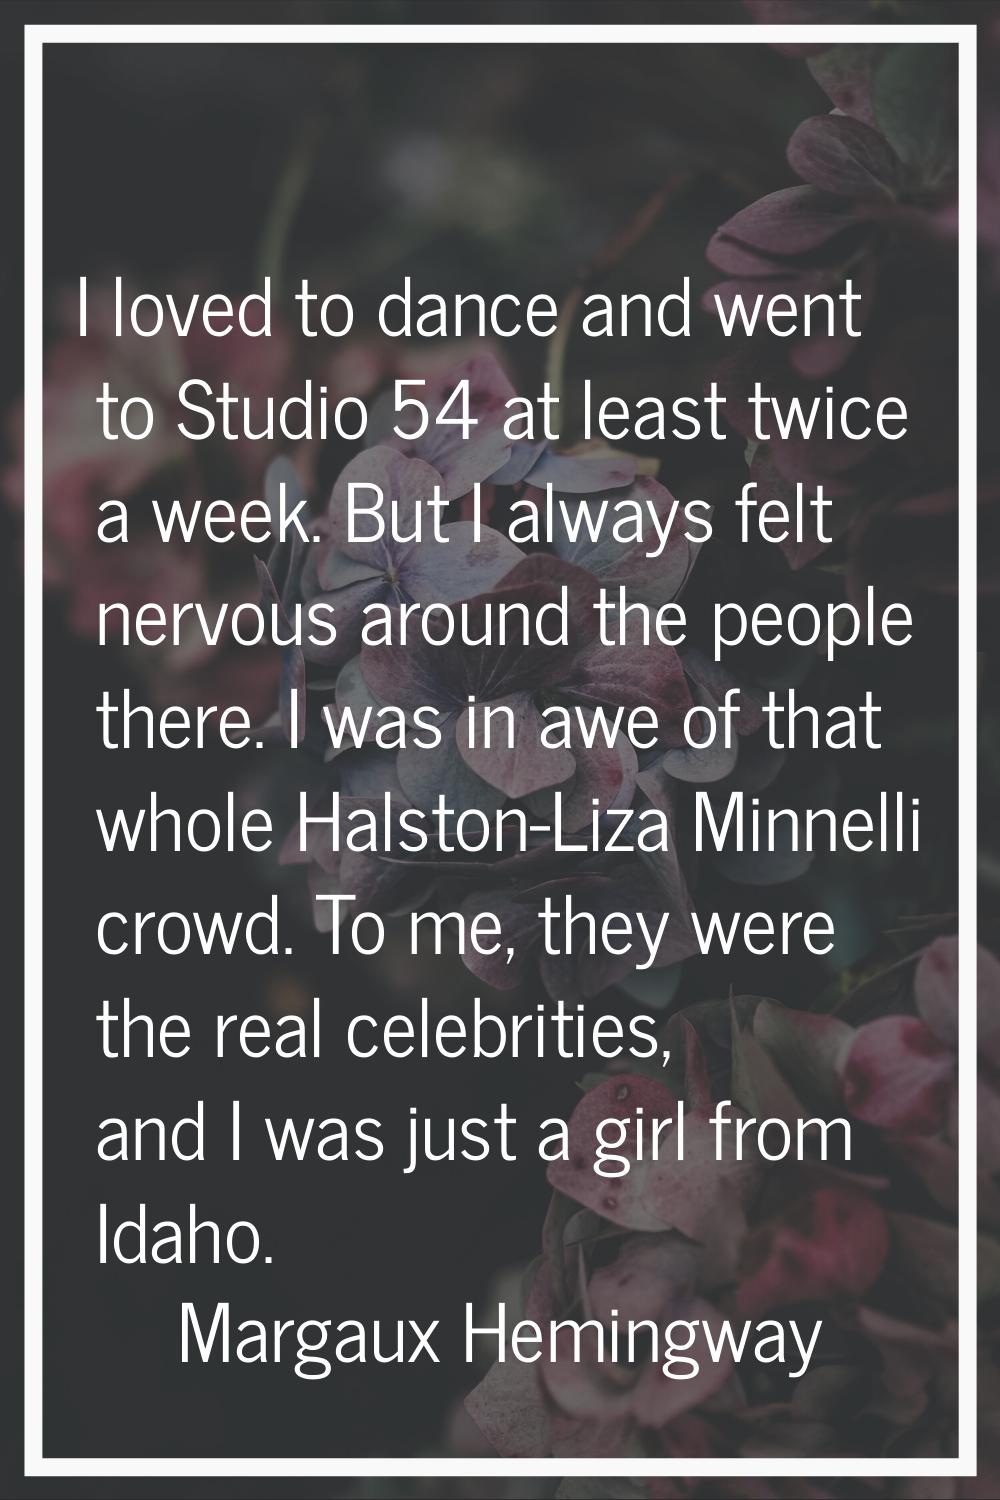 I loved to dance and went to Studio 54 at least twice a week. But I always felt nervous around the 